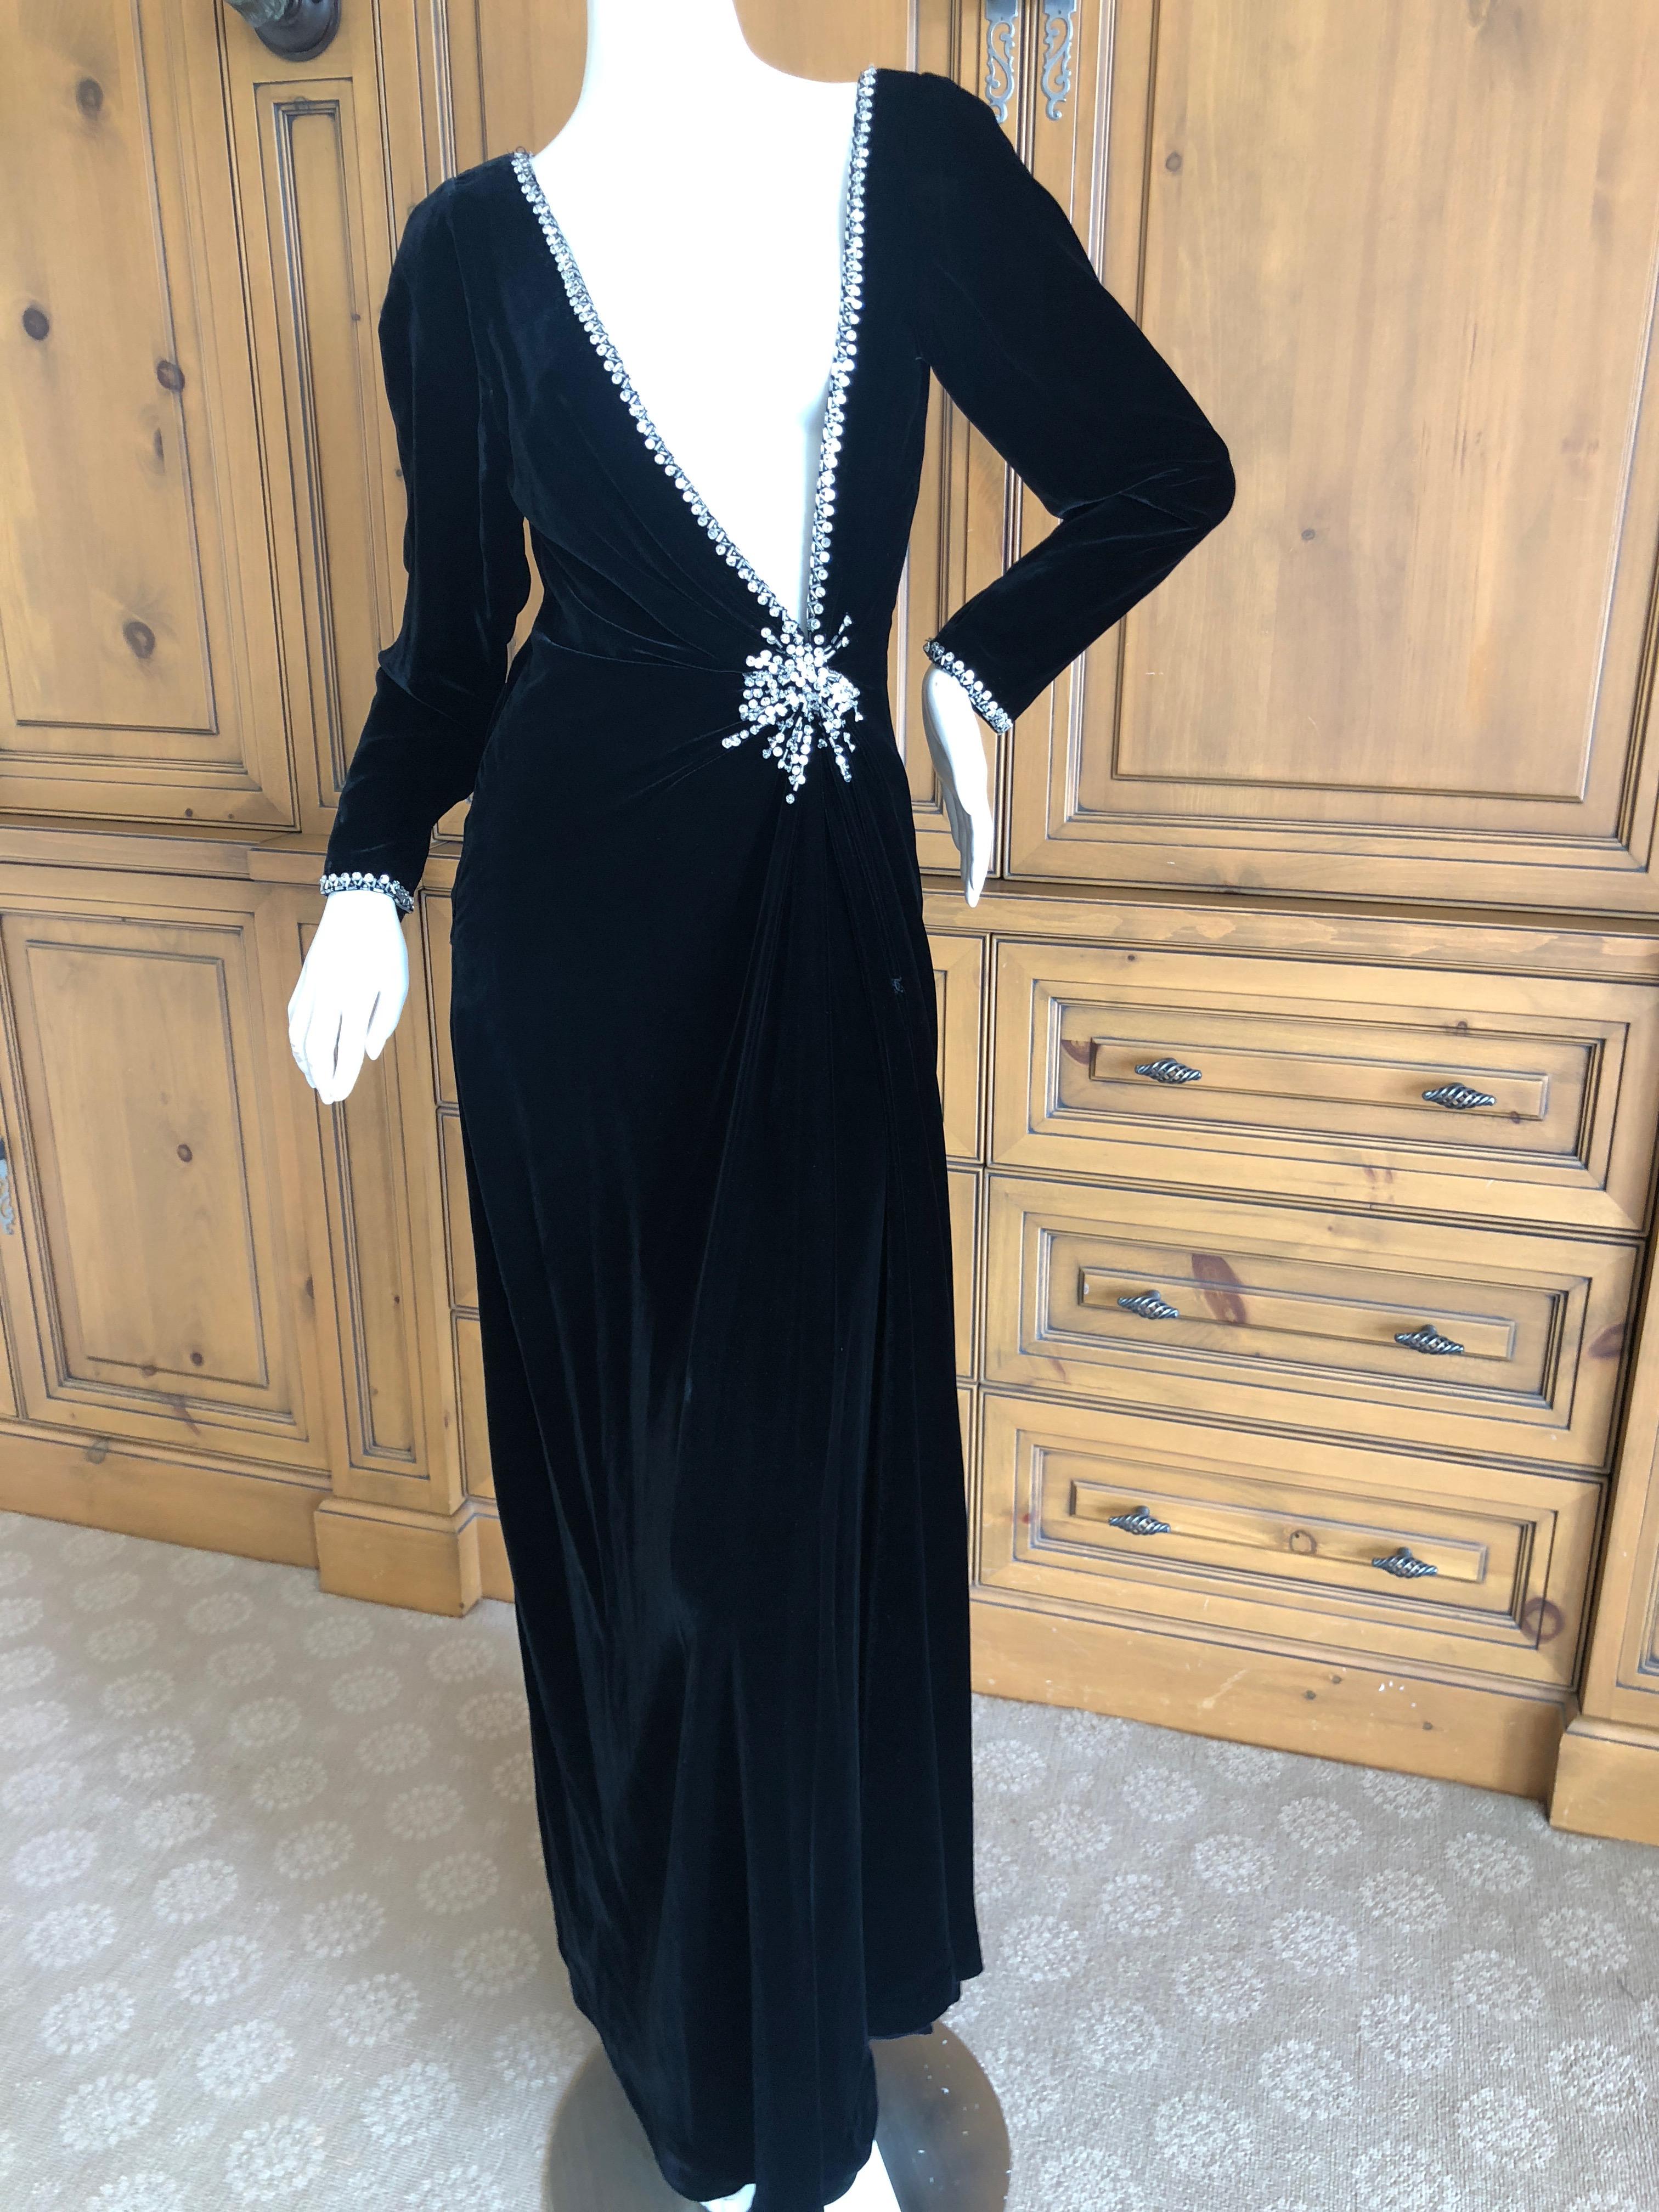 Fabrice for Amen Wardy 1980's Low Cut DIsco Era Silk Velvet Evening Dress In Good Condition For Sale In Cloverdale, CA